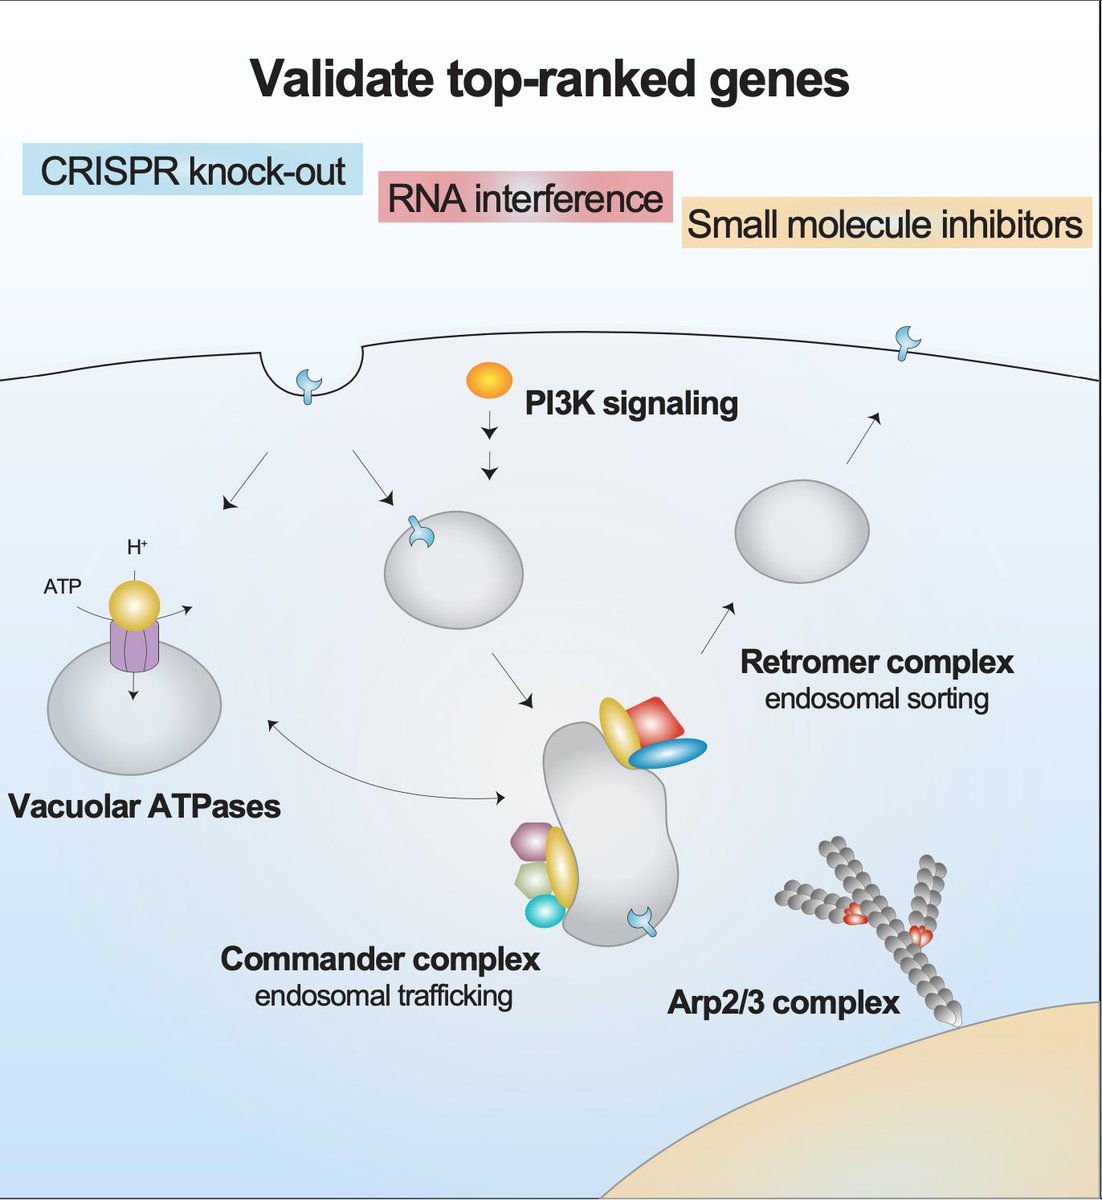 To validate our genome-wide screen and quantify the impact of each top-ranked gene on viral infection, we used several approaches, including gene knock-out (CRISPR), knock-down (RNAi), and small molecule inhibitors.